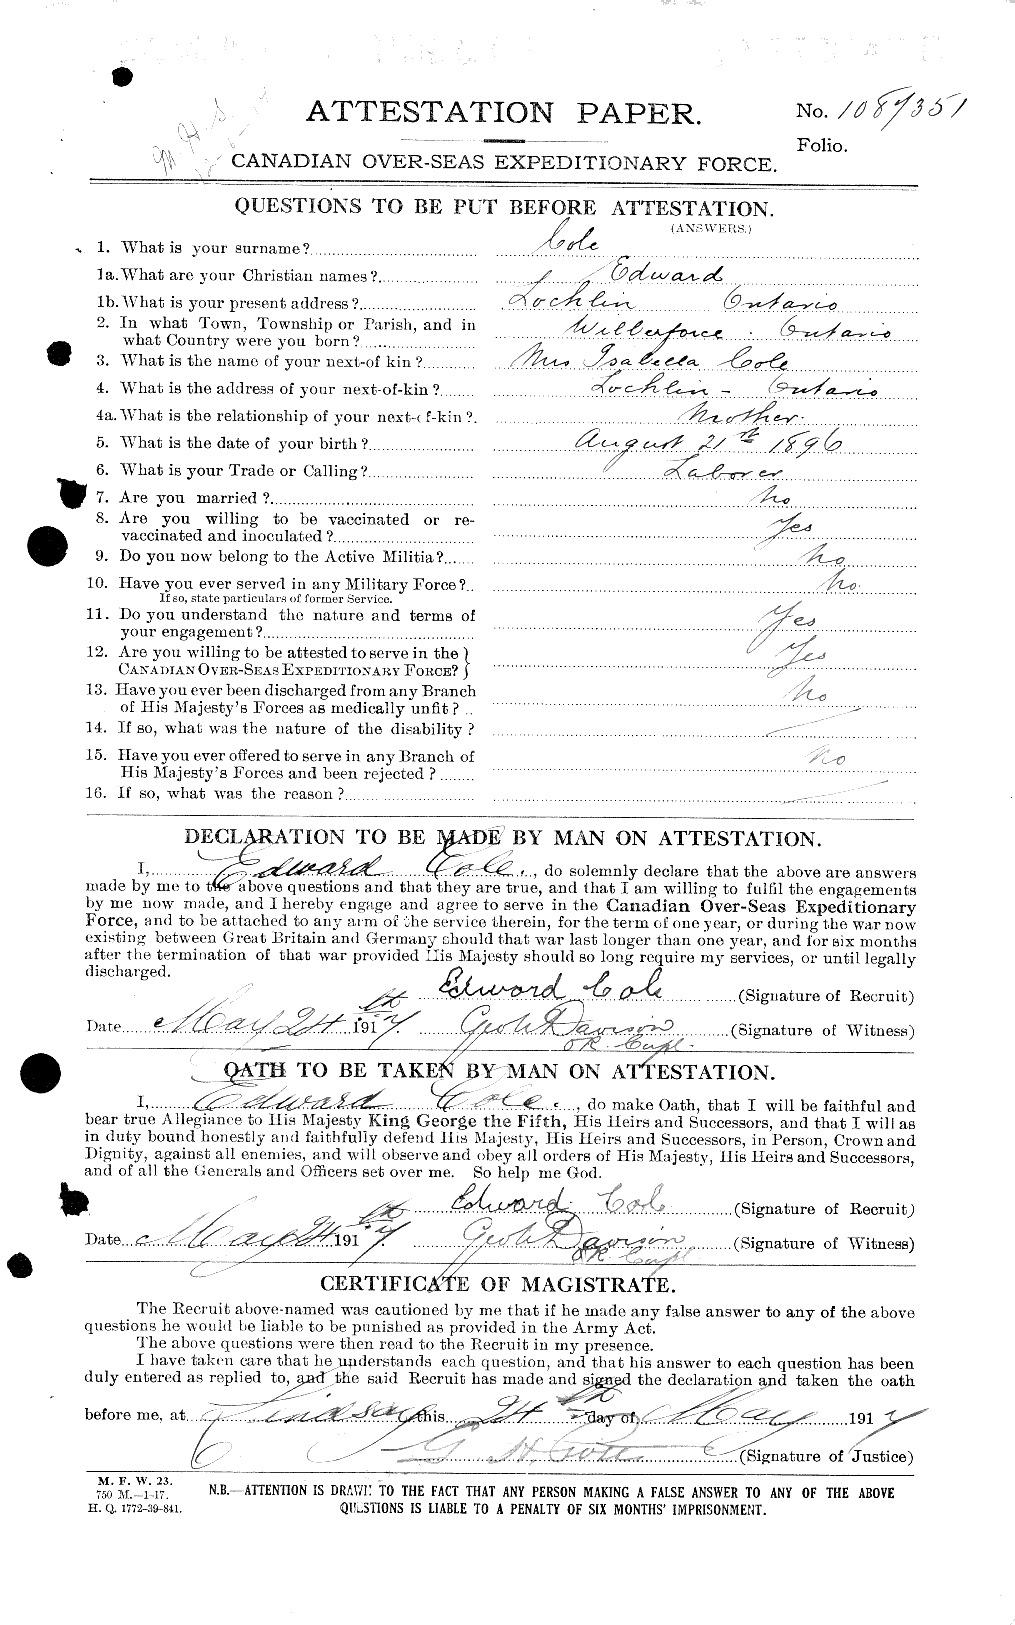 Personnel Records of the First World War - CEF 027678a